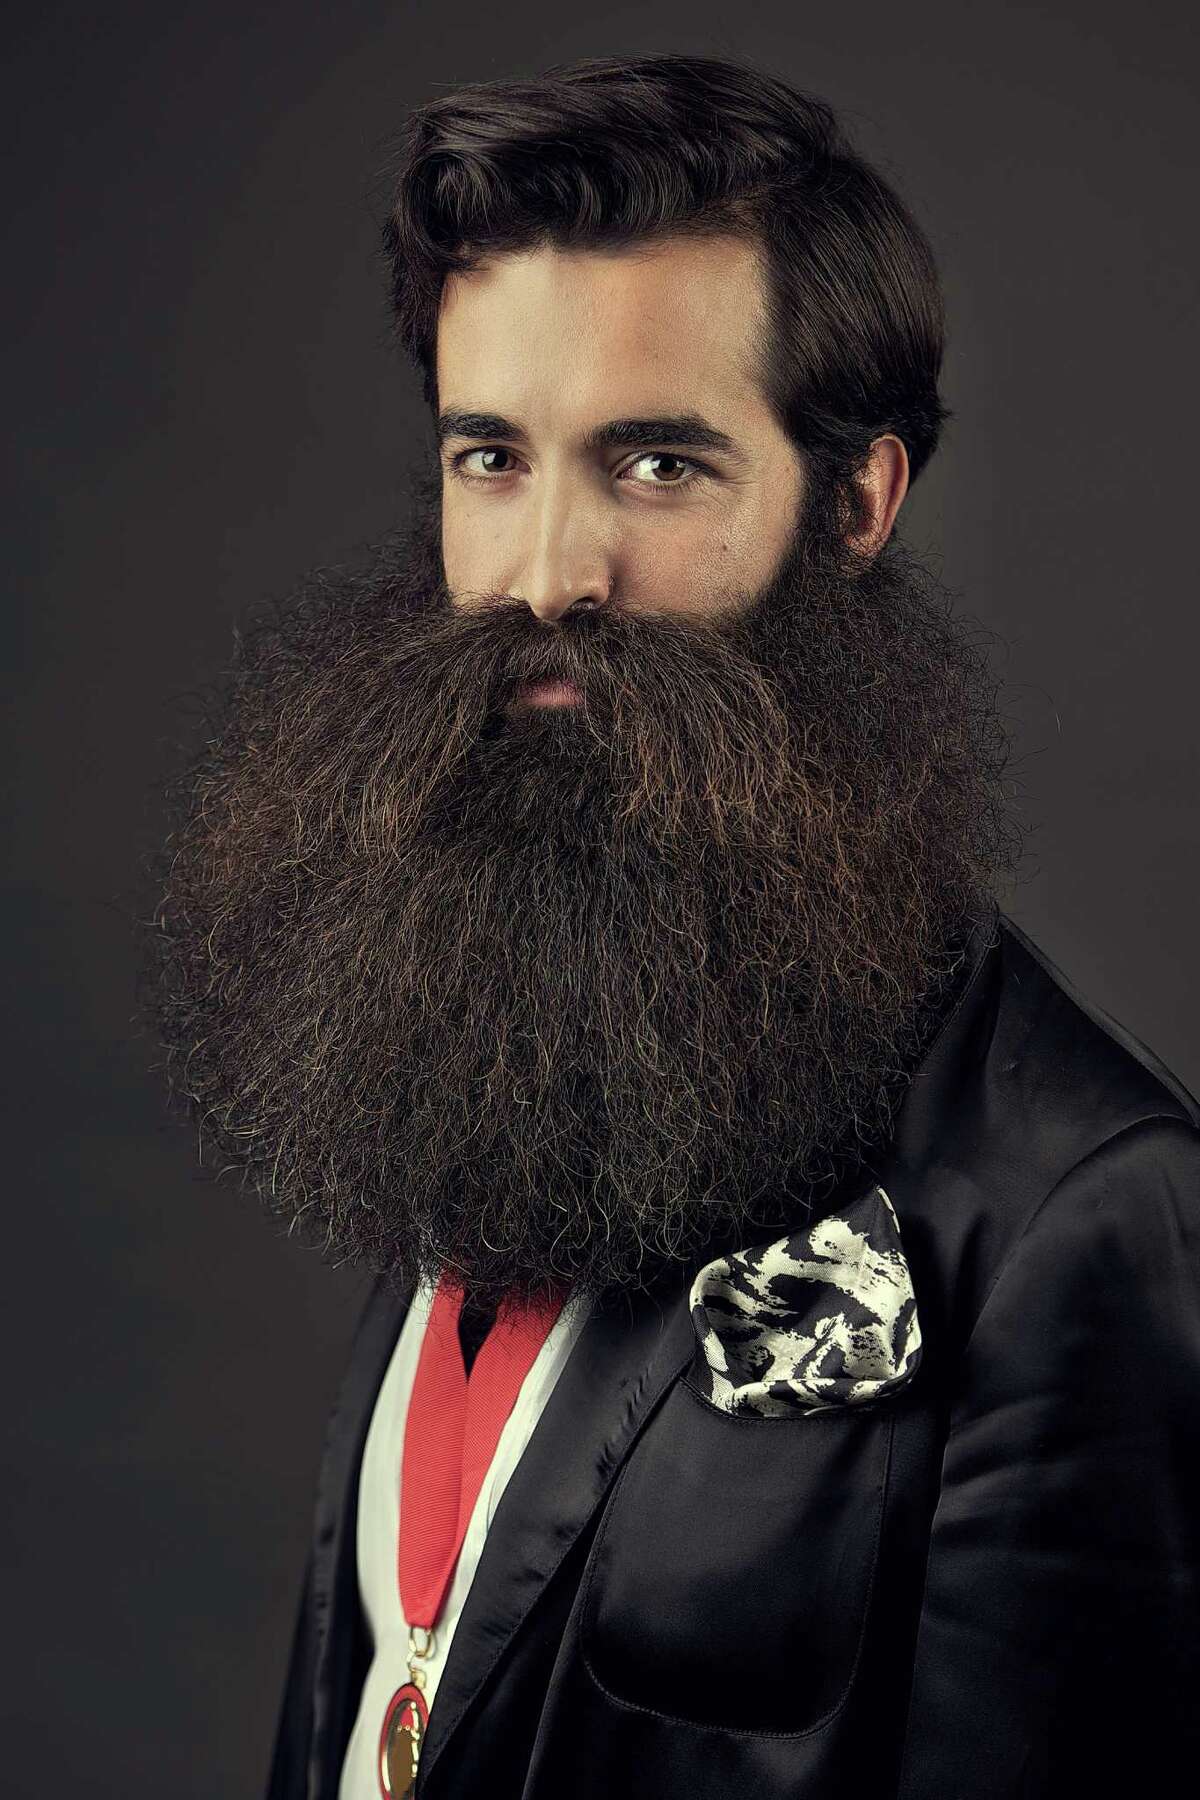 The Just For Men World Beard and Moustache Championships crowned 18 title winners, highlighting the best and boldest examples of facial hair from across the globe on Saturday, October 25th, 2014 in Portland, OR.